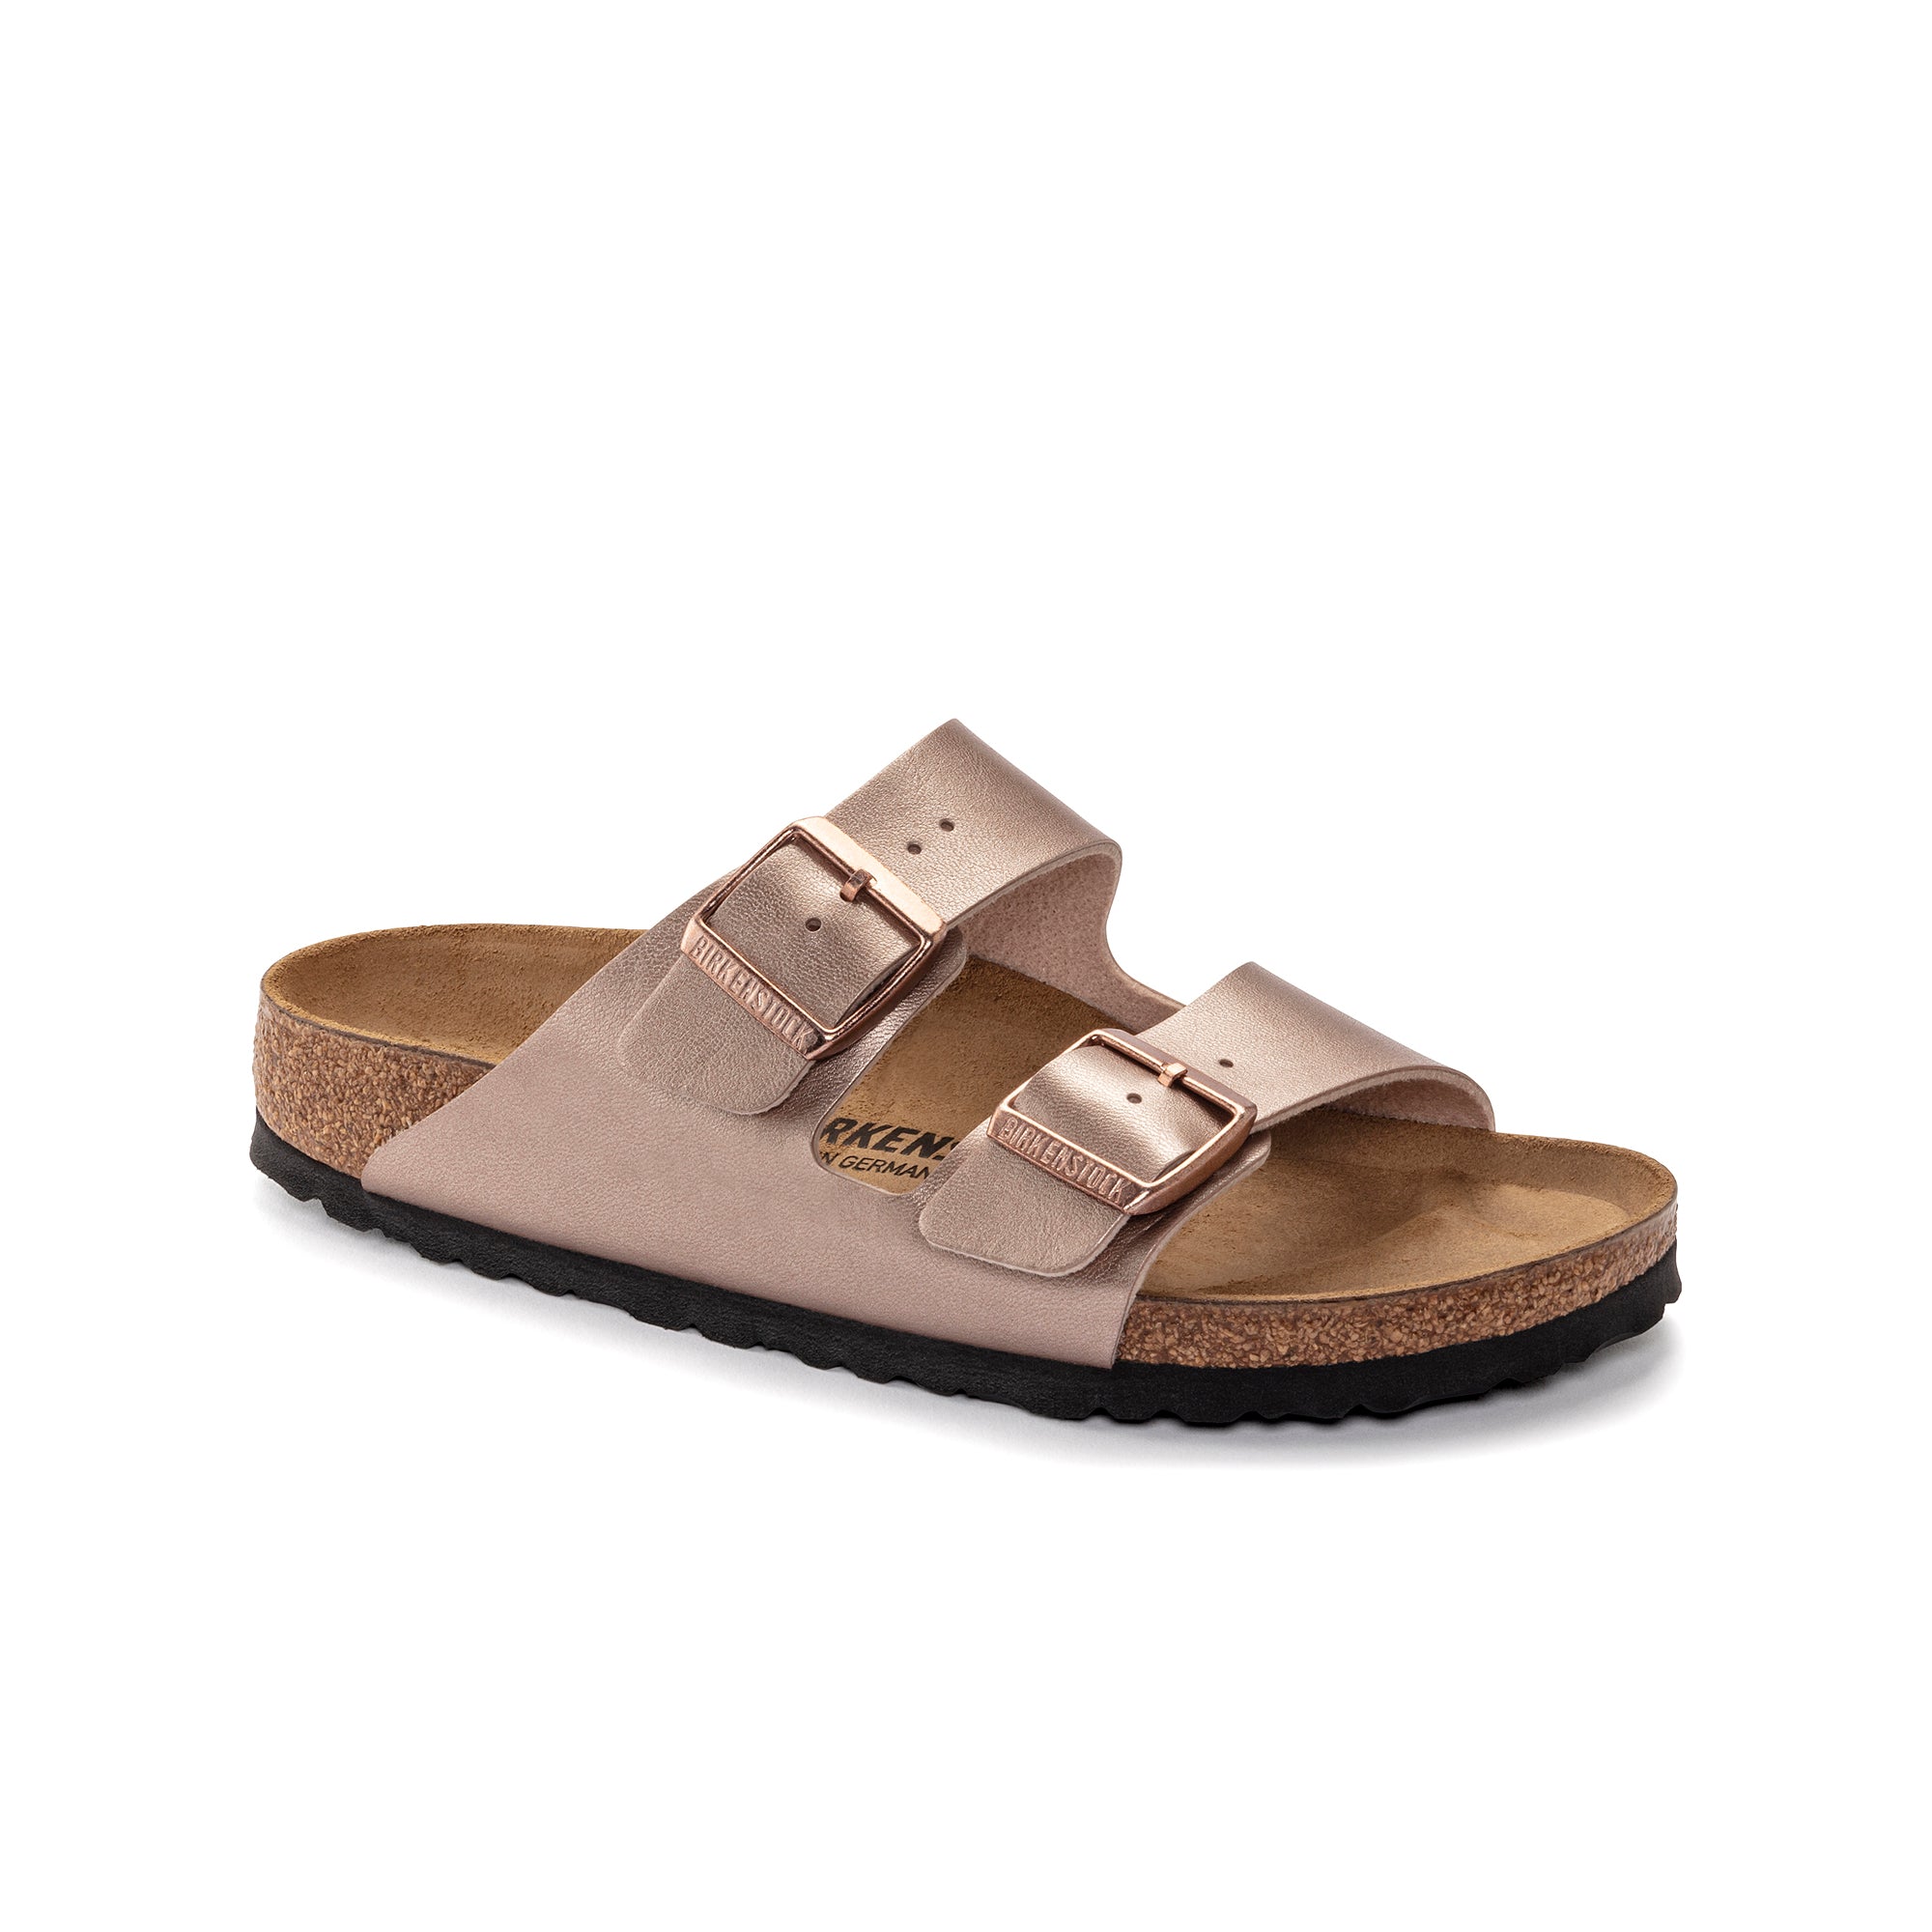 Full Opening Sandals, for Boys Brown Light All Over Printed